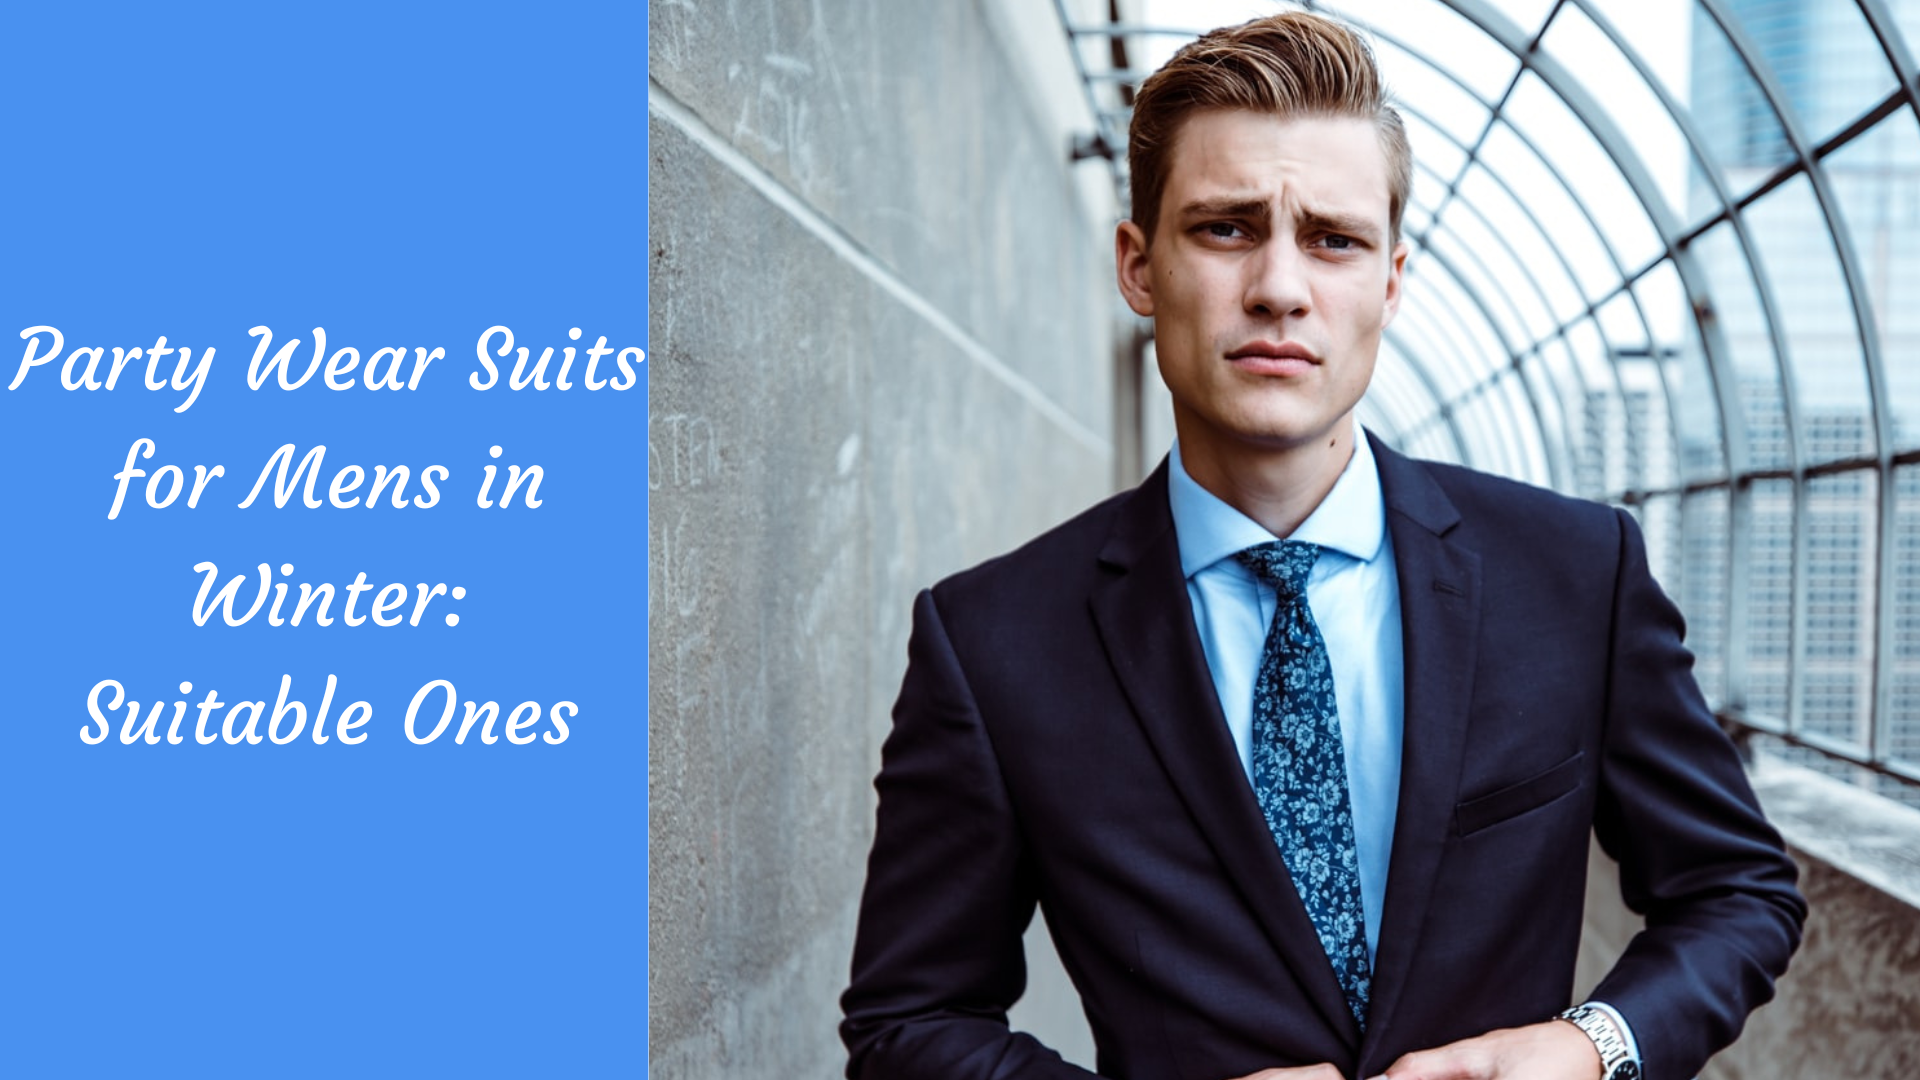 Party Wear Suits for Mens in Winter: Suitable Ones - The Kosha Journal